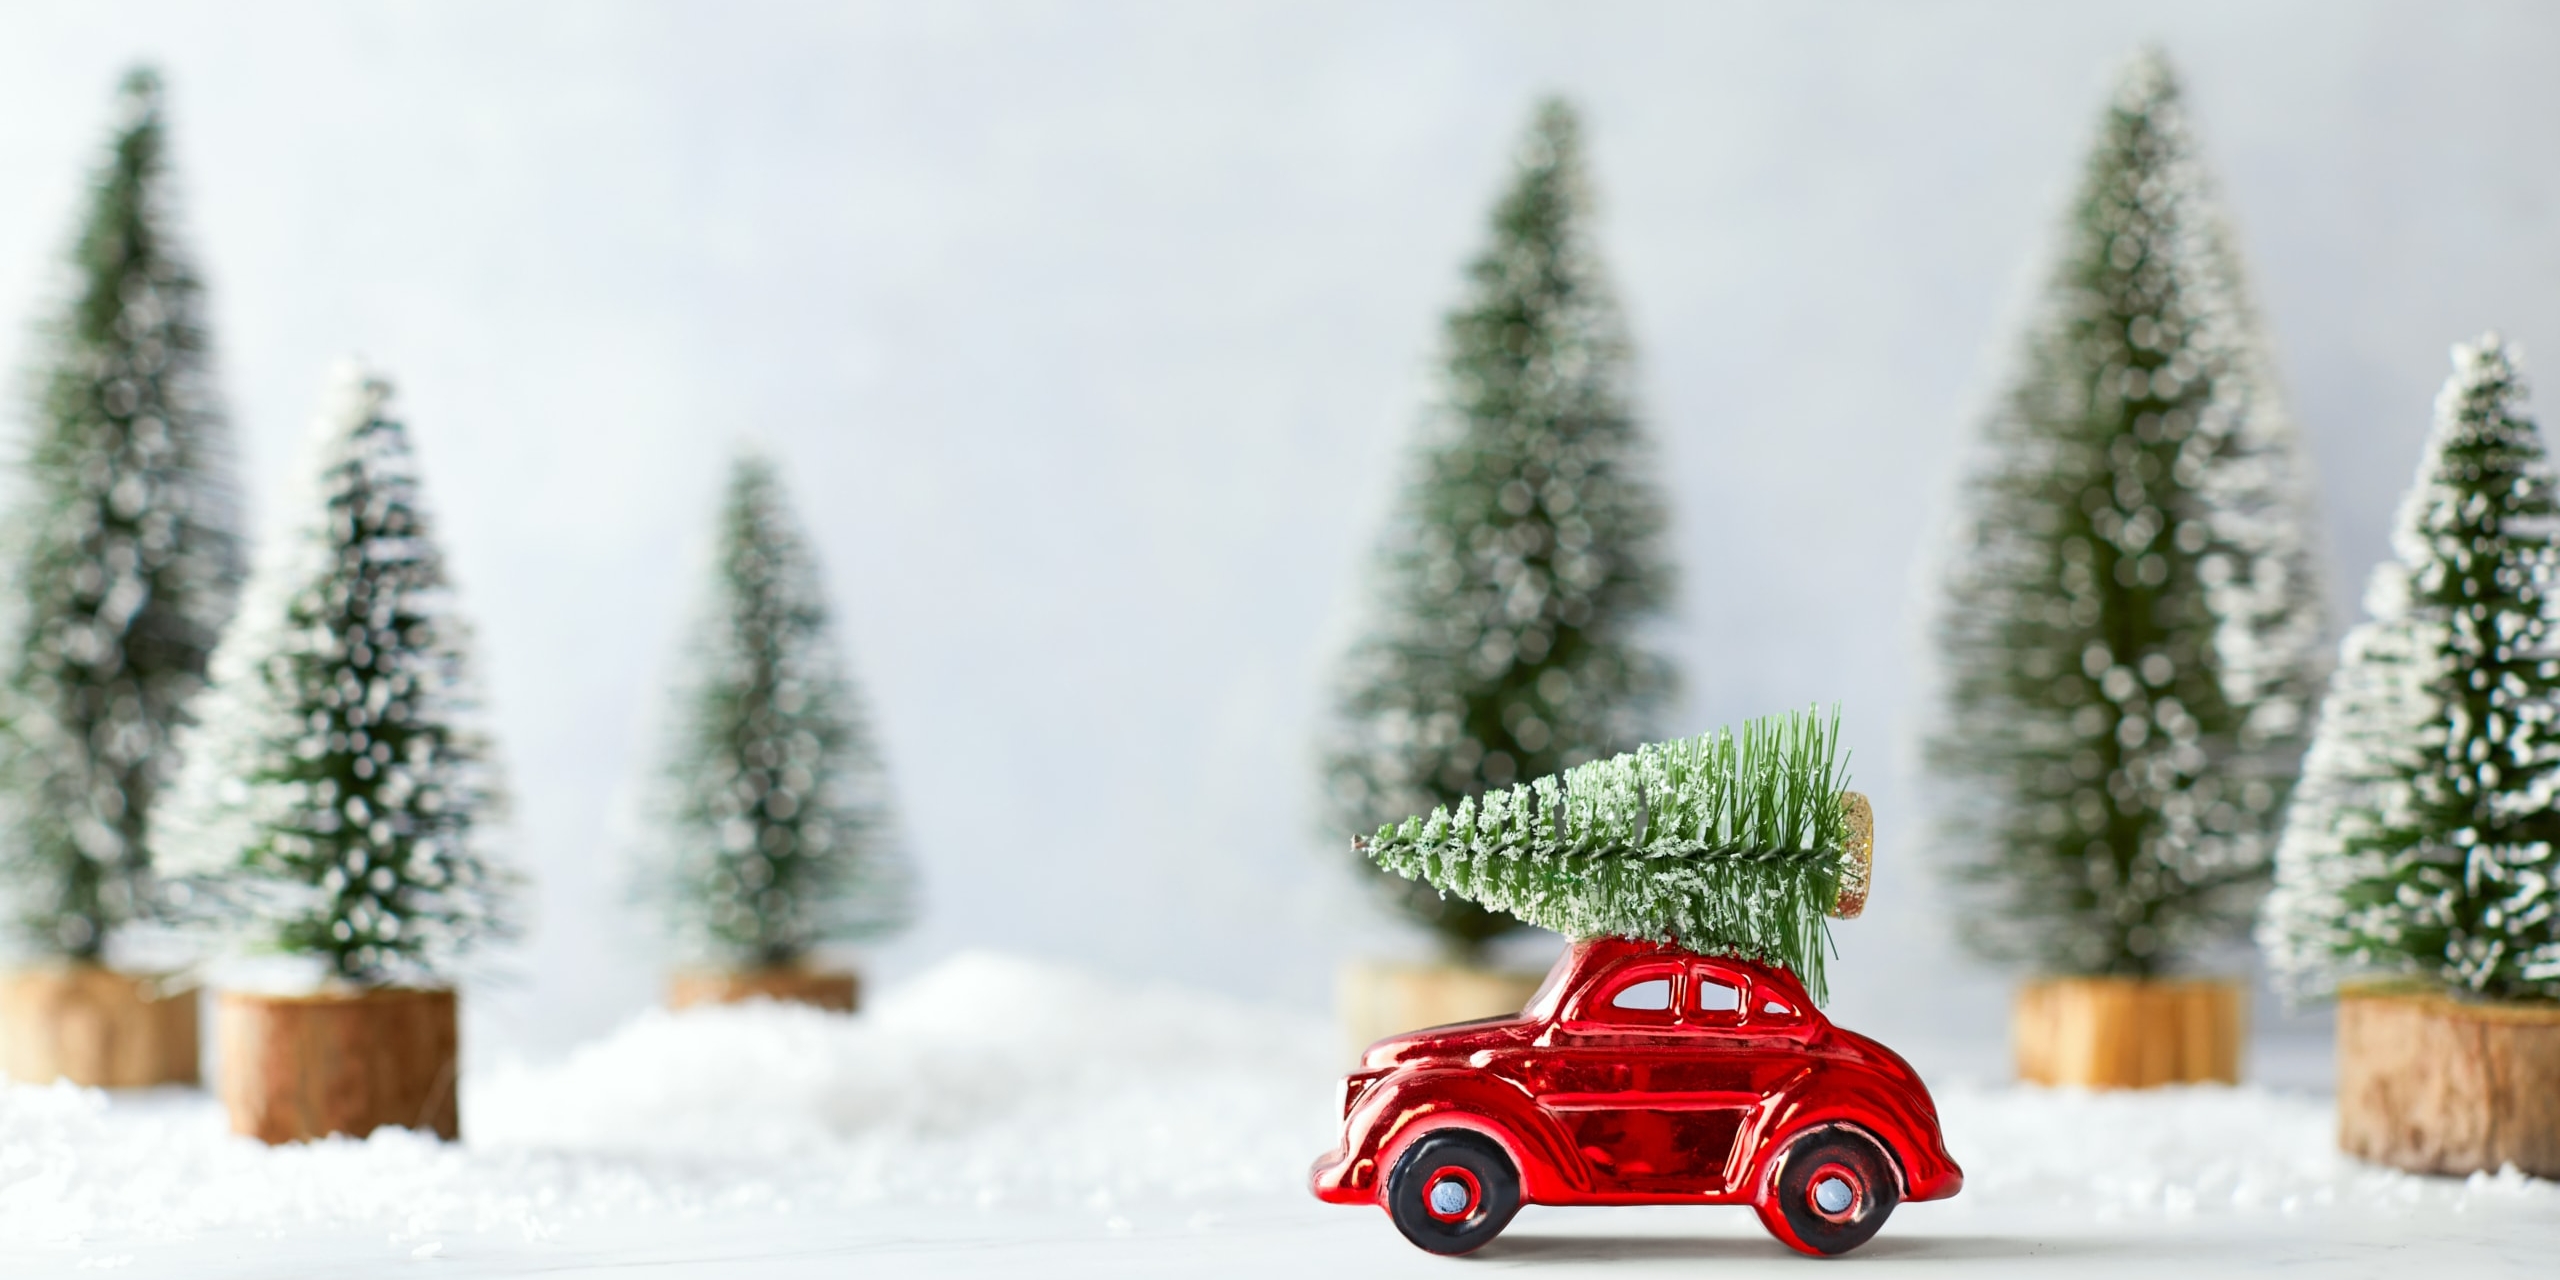 Cute,Winter,Holidays,Concept,With,Retro,Car,Transporting,Christmas,Tree,